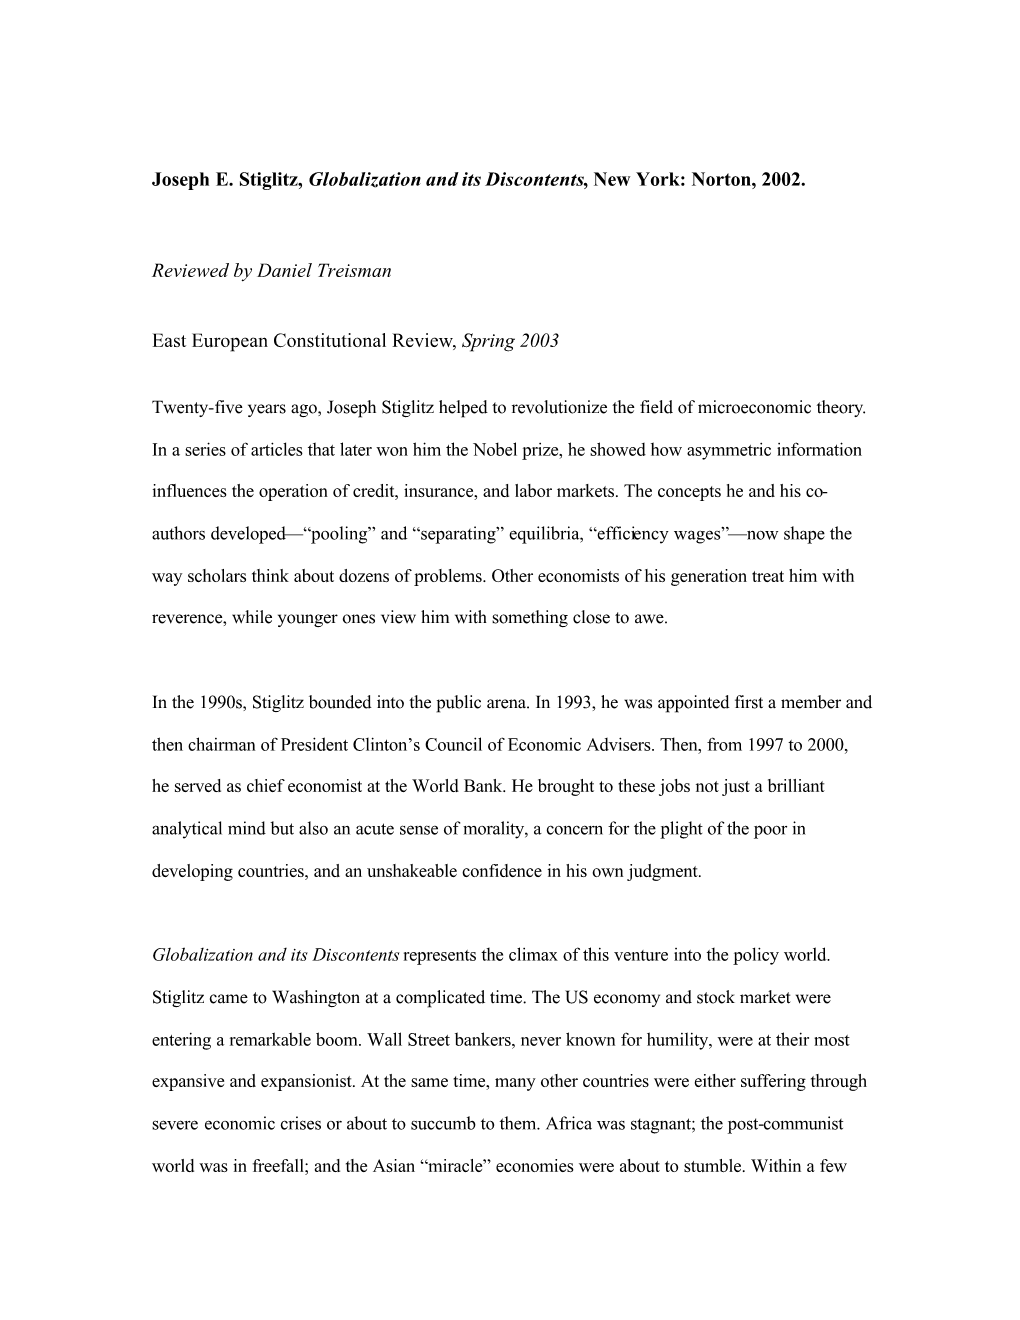 Globalization and Its Discontents, New York: Norton, 2002